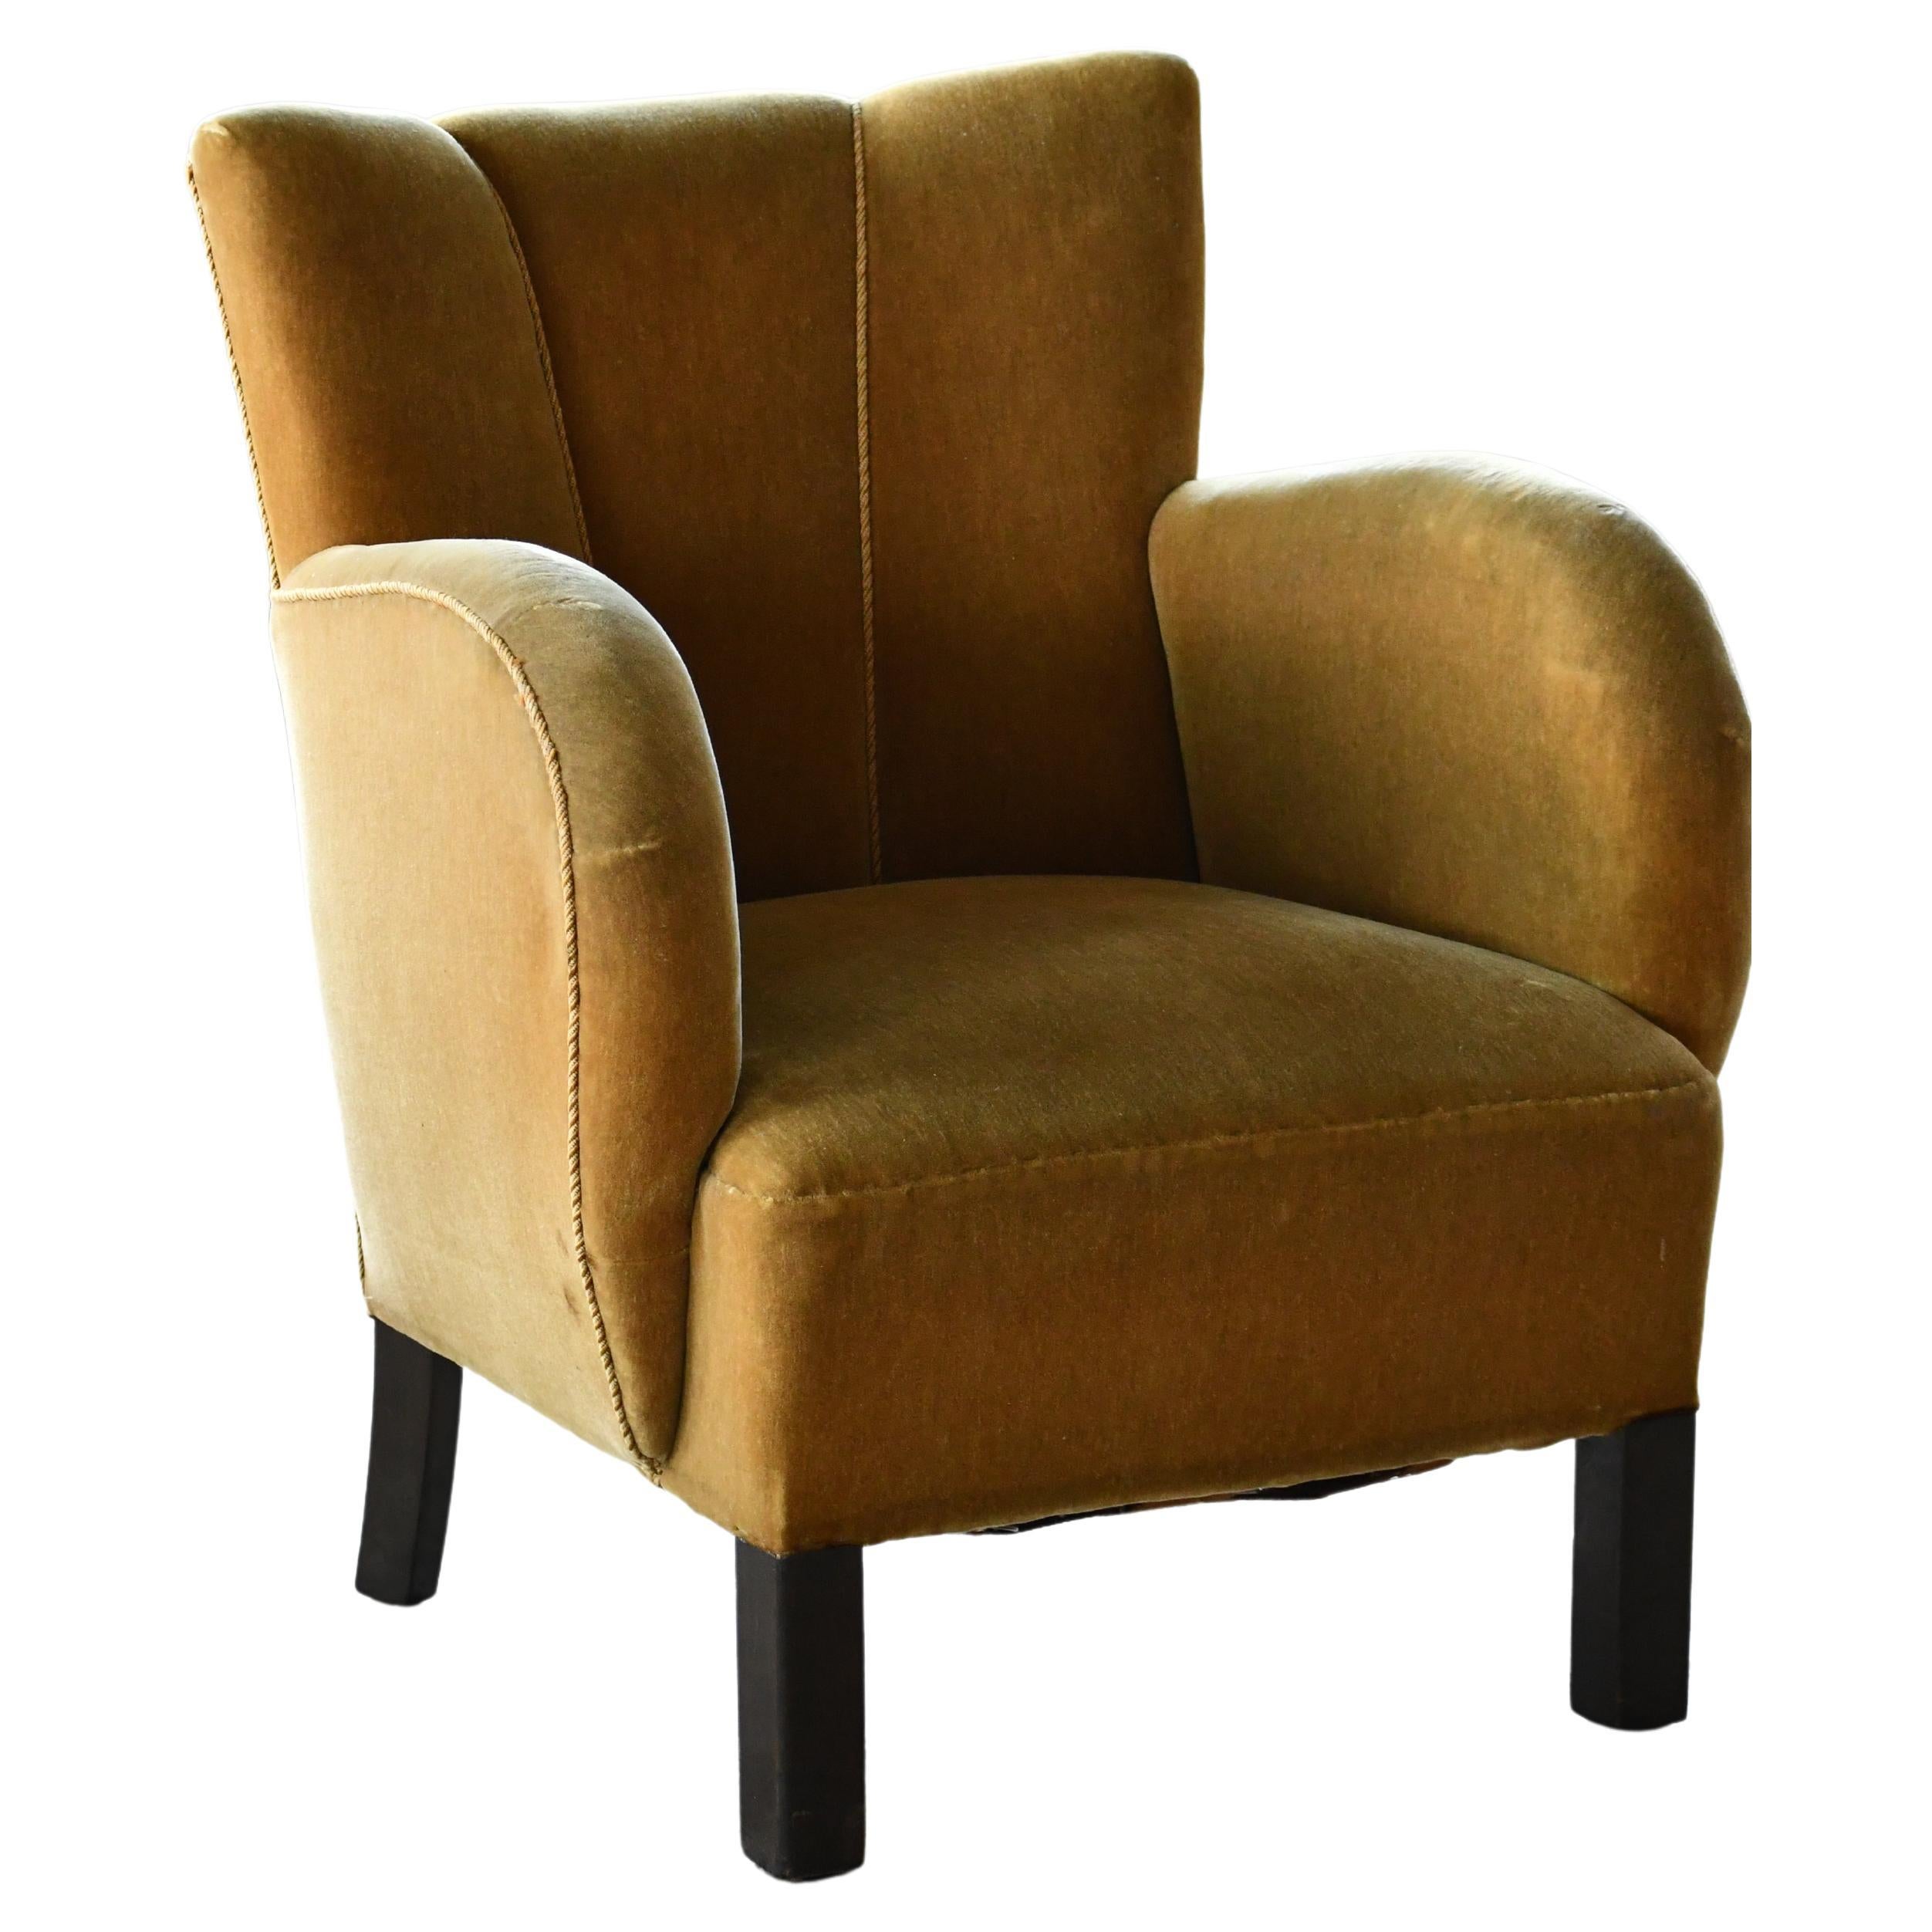 Danish Early Midcentury or Art Deco Low Lounge Chair 1930-40s (pair available) For Sale